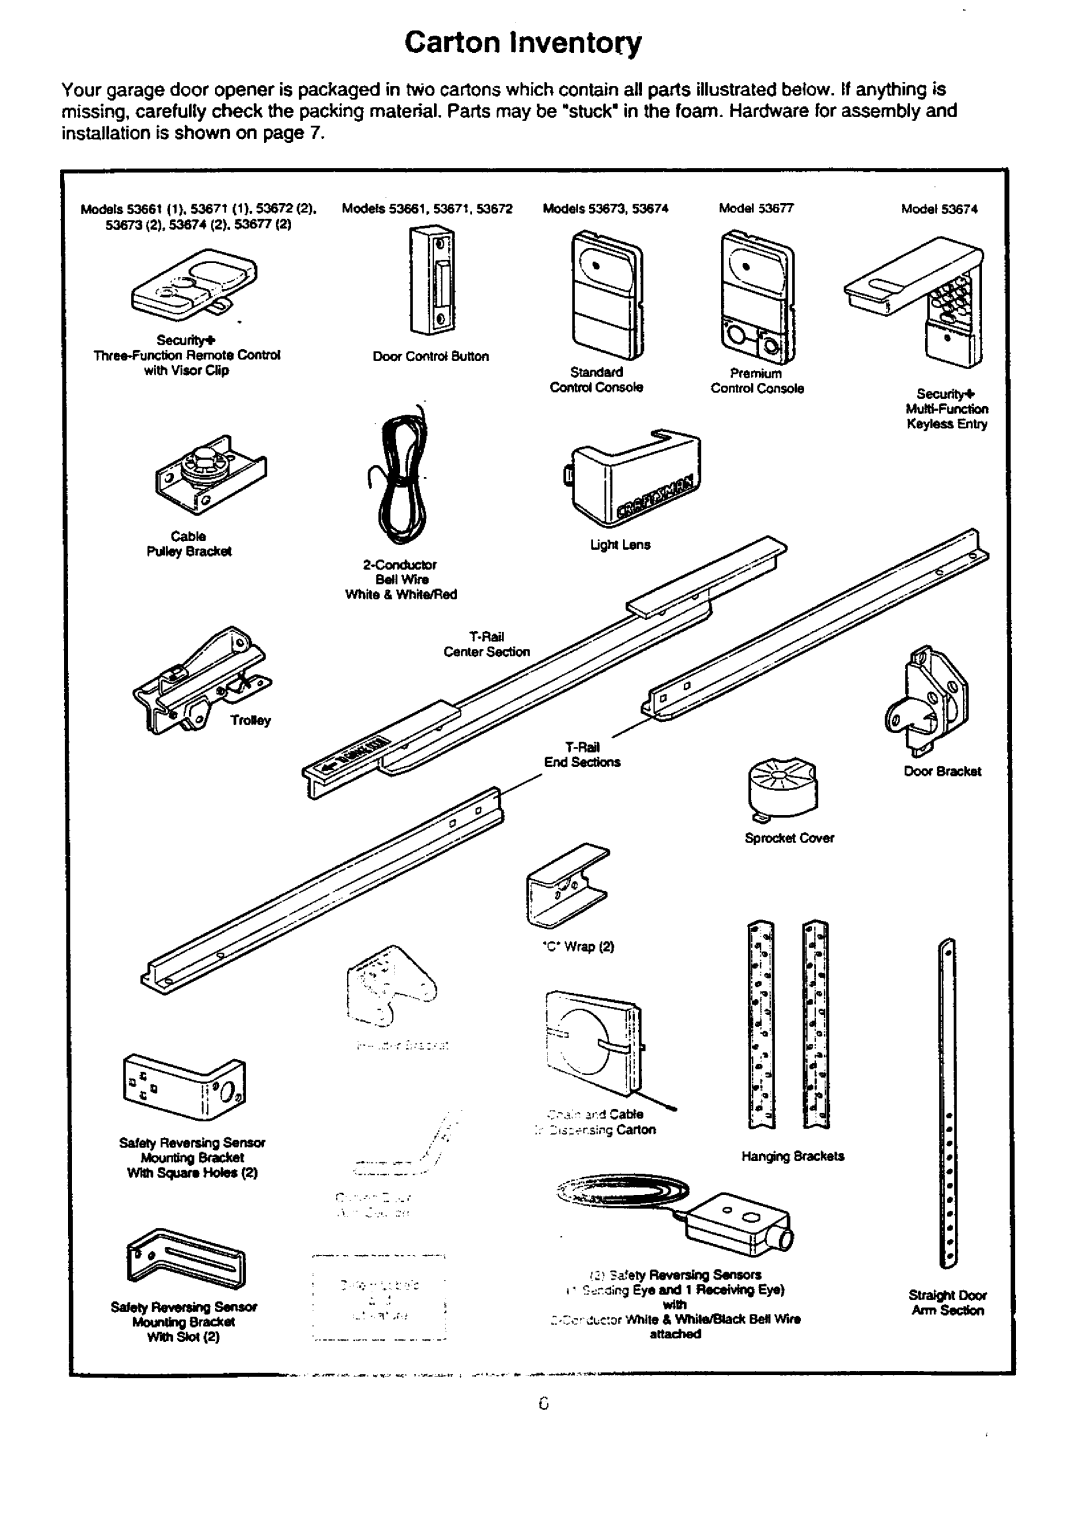 Craftsman 139.53674SRT Carton Inventory, Conductor Bell Wire White & Whie/led T.P.ail Center Section, Hanging Brackets 